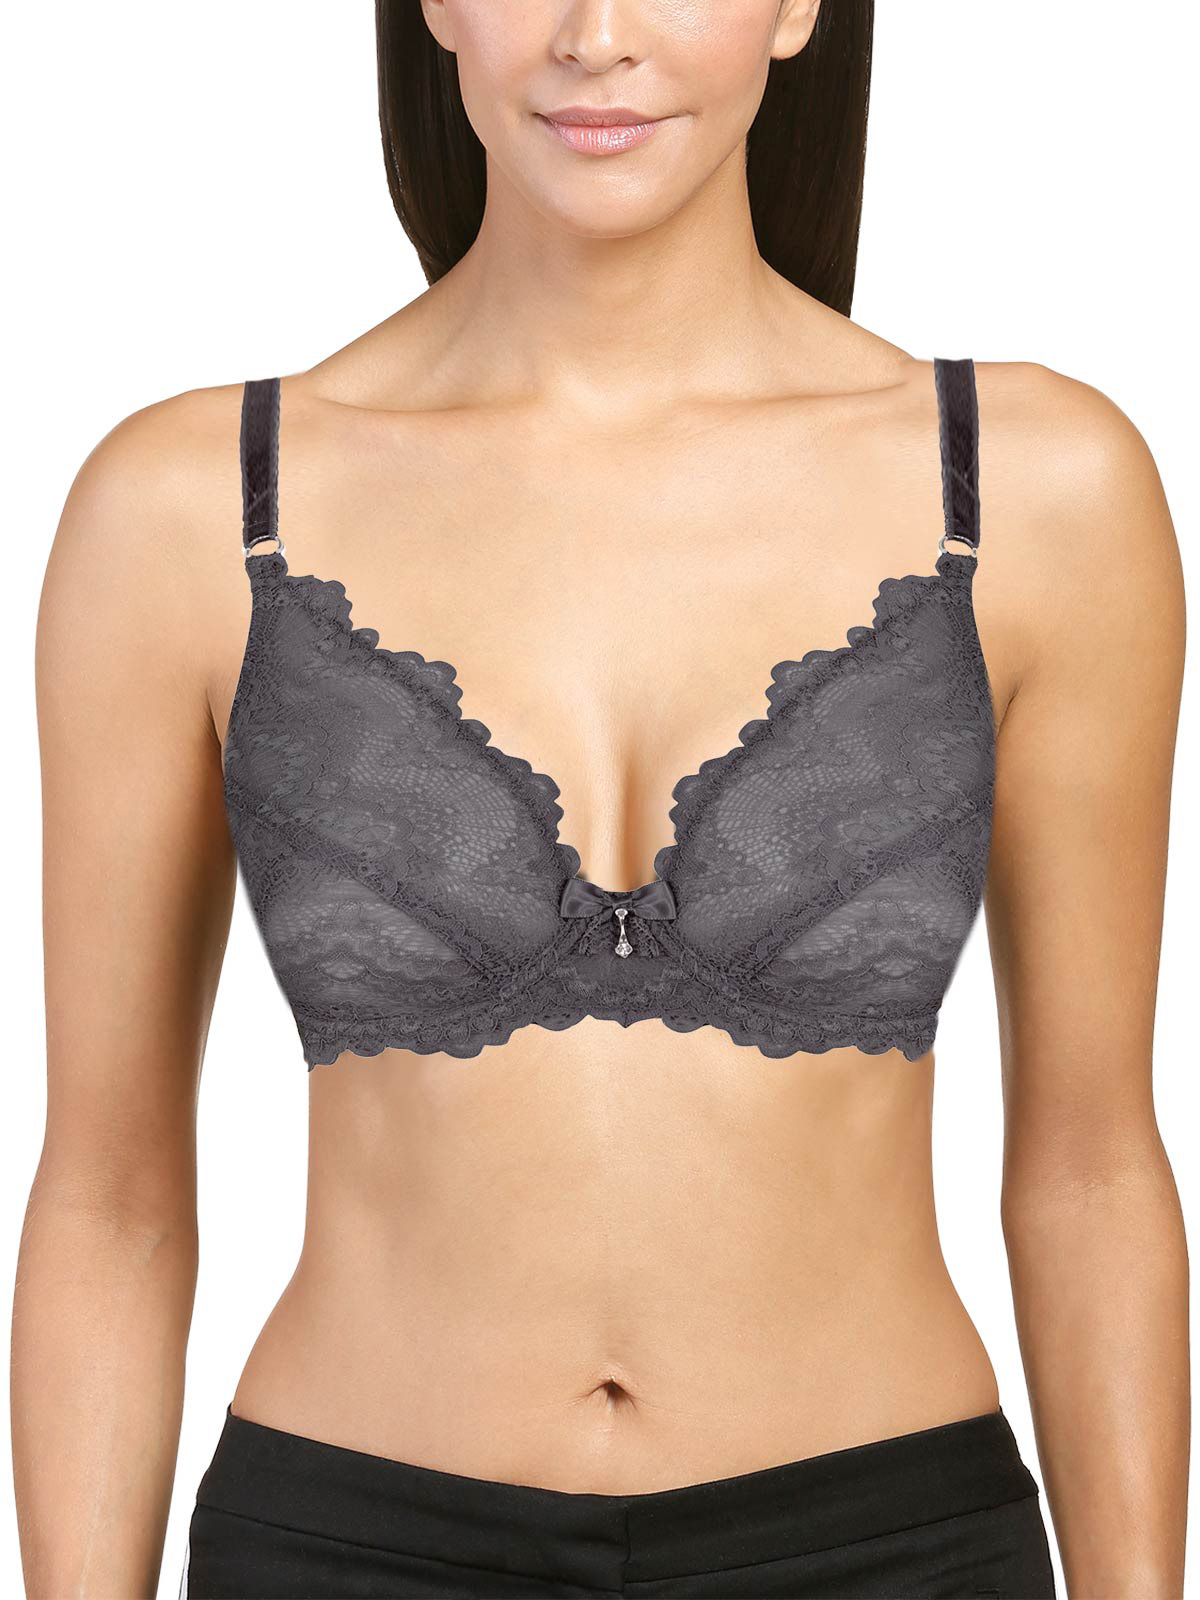 Cybele by Naturana Moulded Padded Underwired T-Shirt Bra Ladies Soft Cup  Bras BN